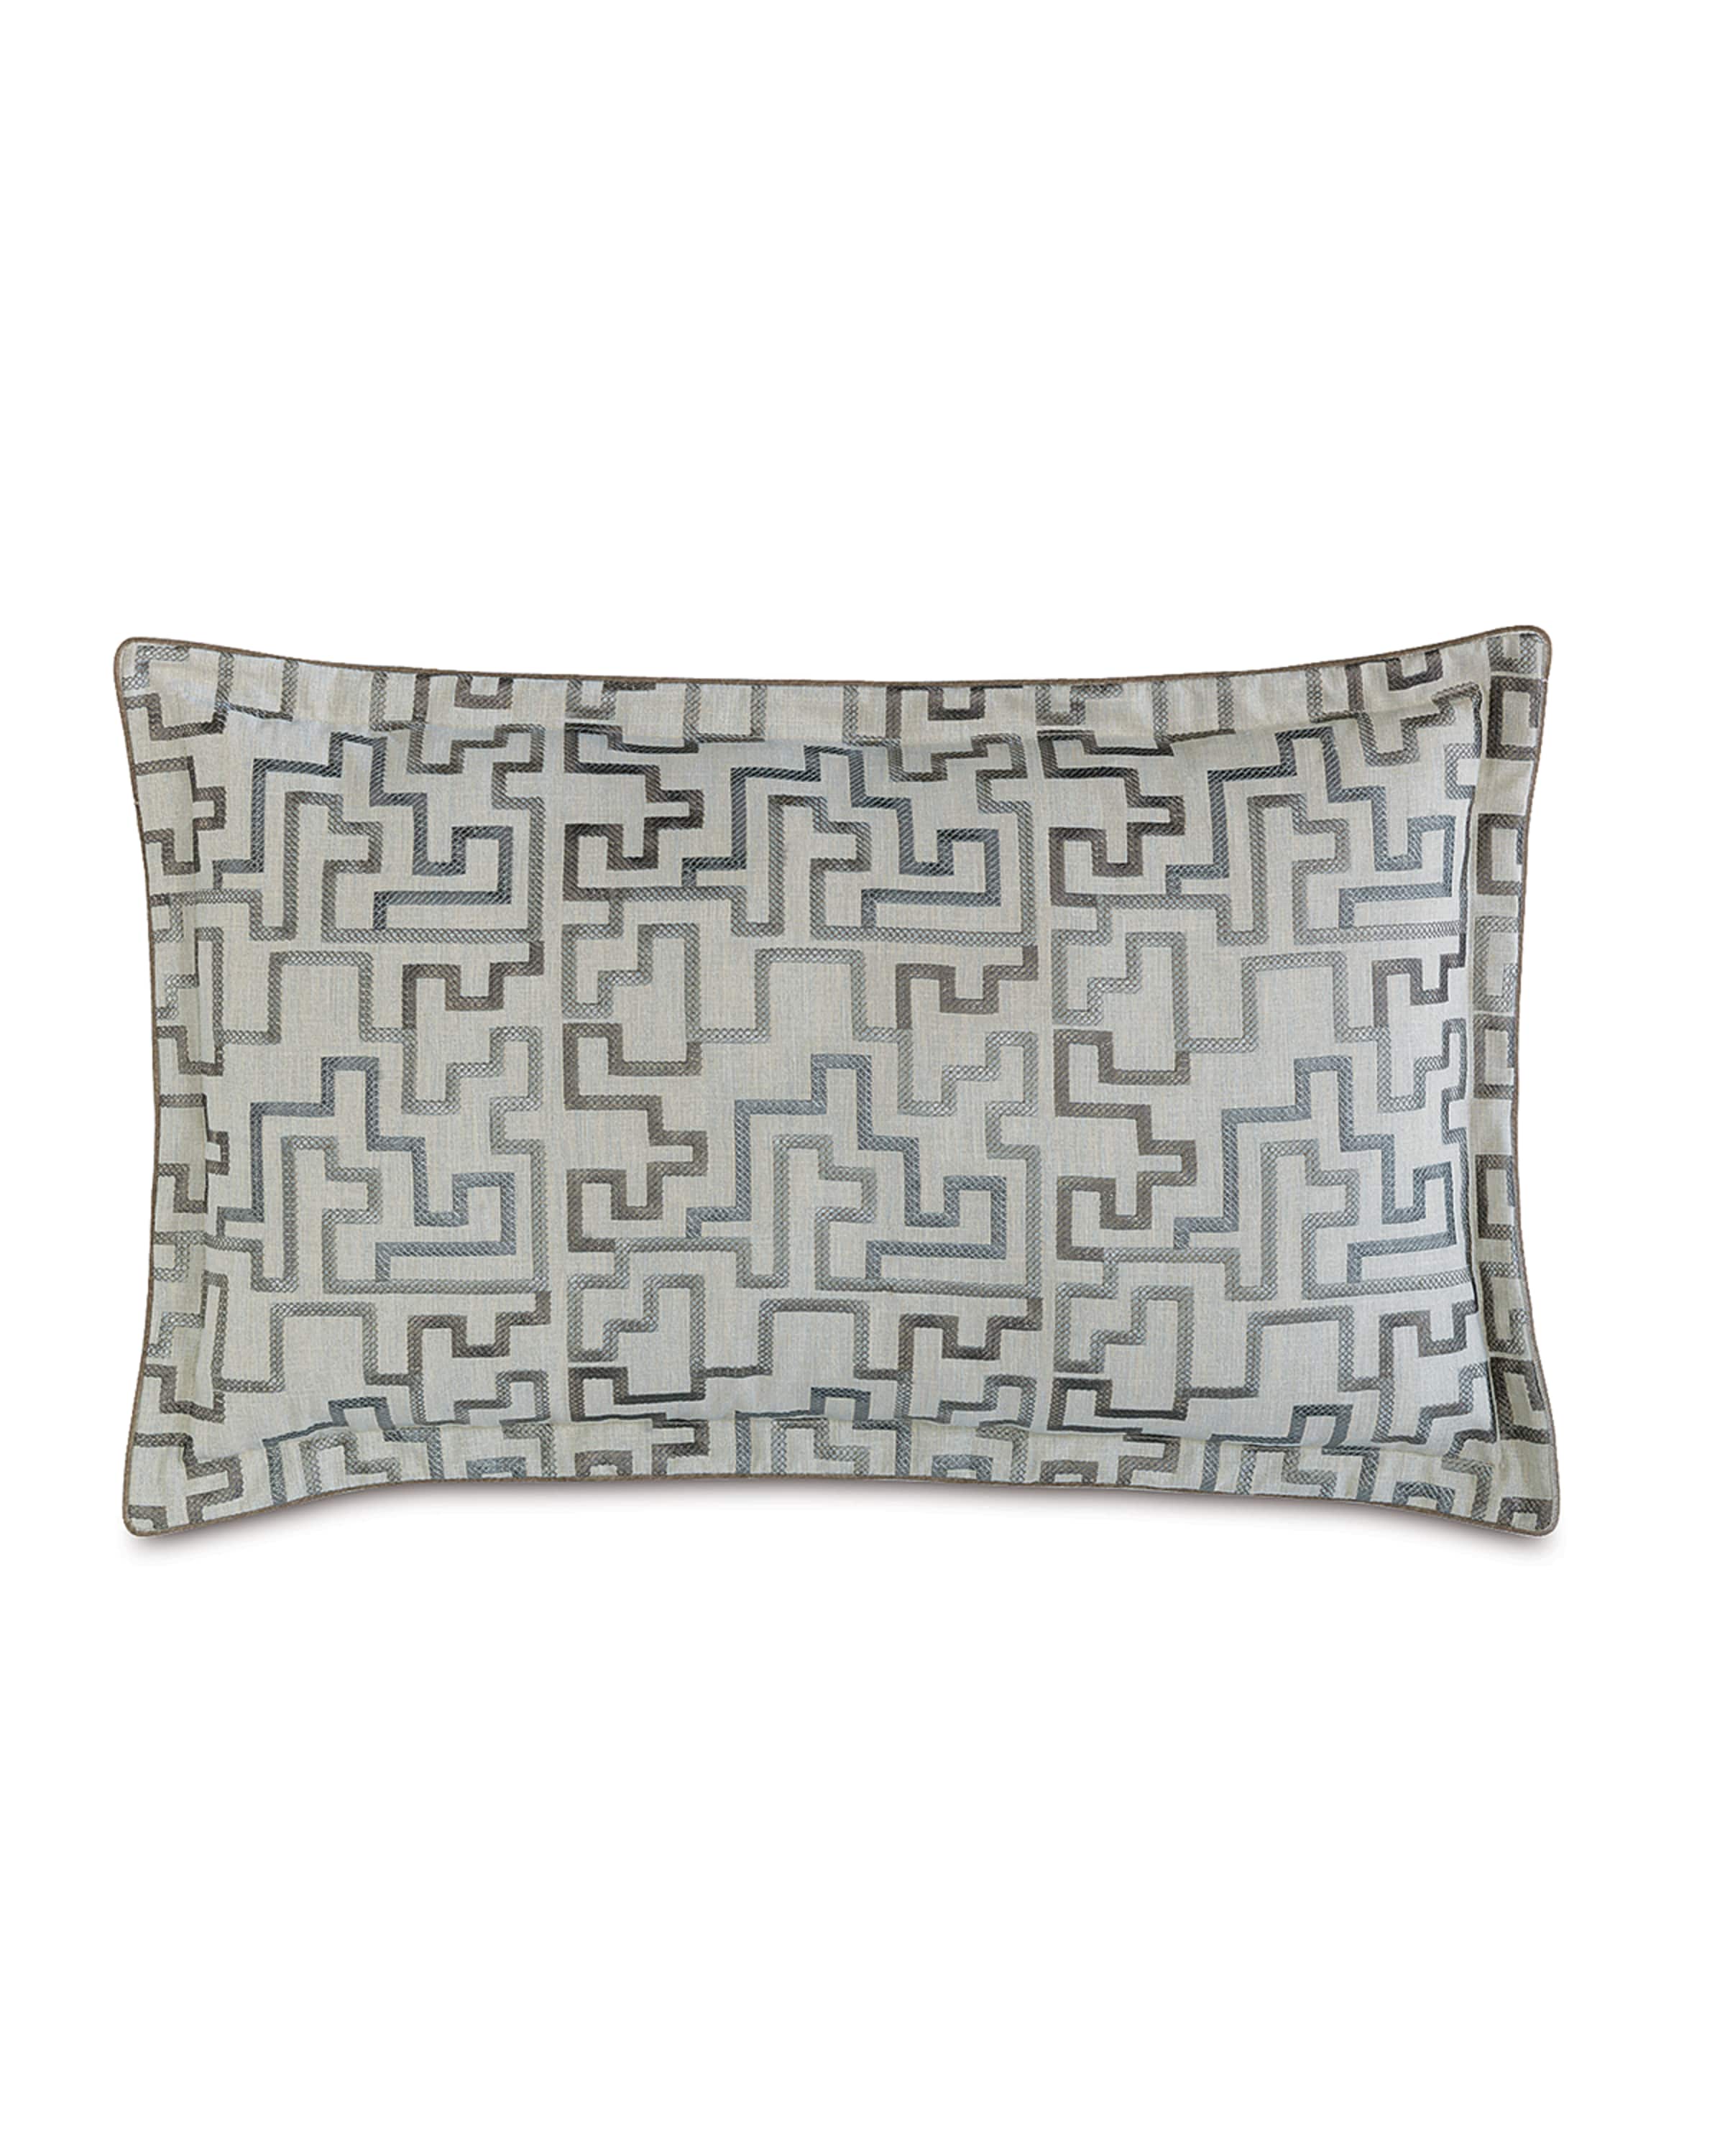 Eastern Accents Prosecco Stone King Embroidered Pillow